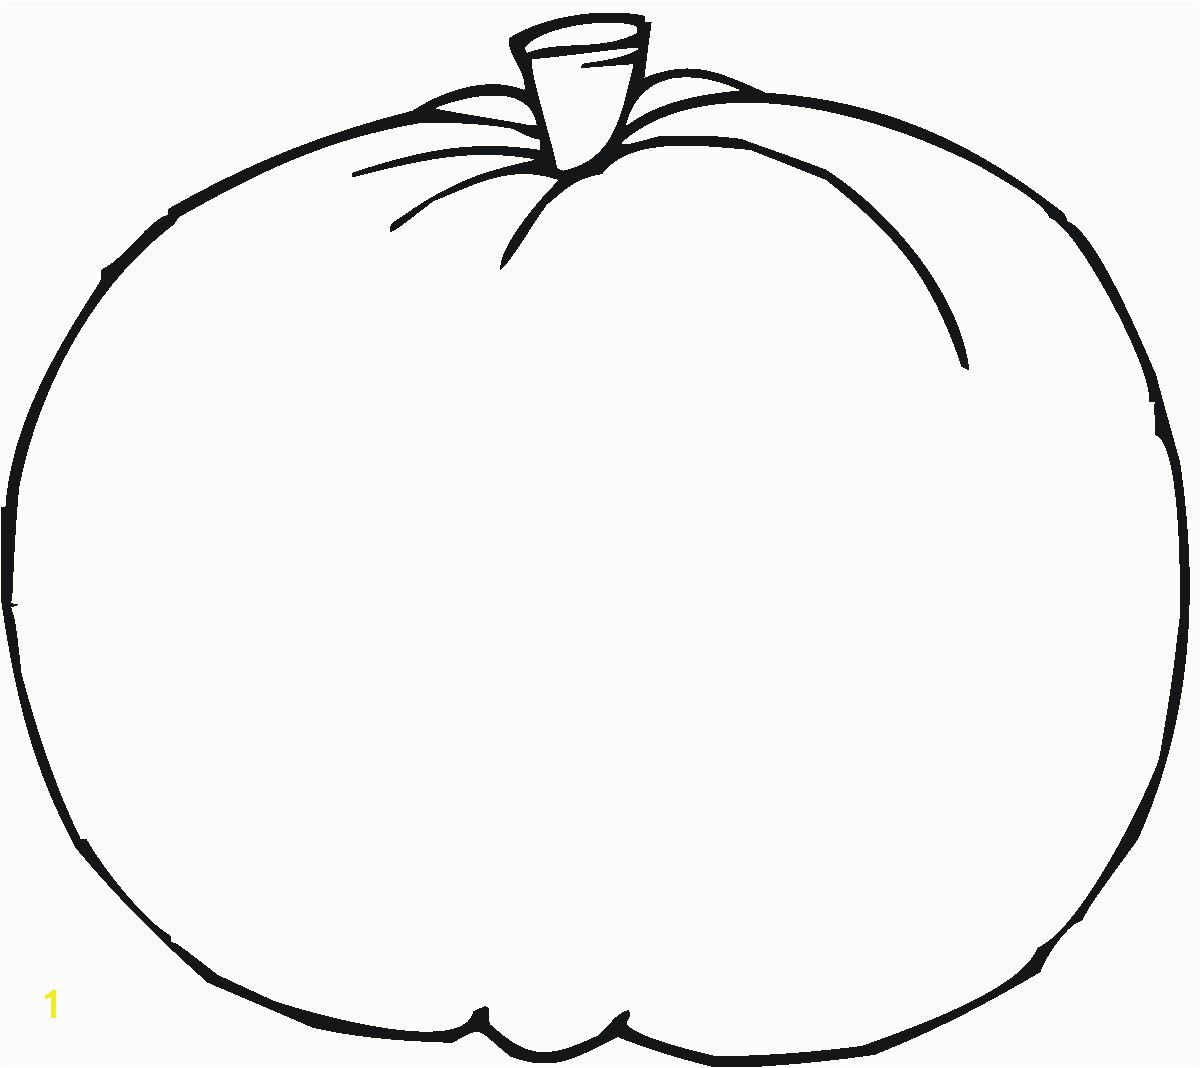 Decorate A Pumpkin Coloring Page Pumpkin Outline for Lego Painting Preschool Time